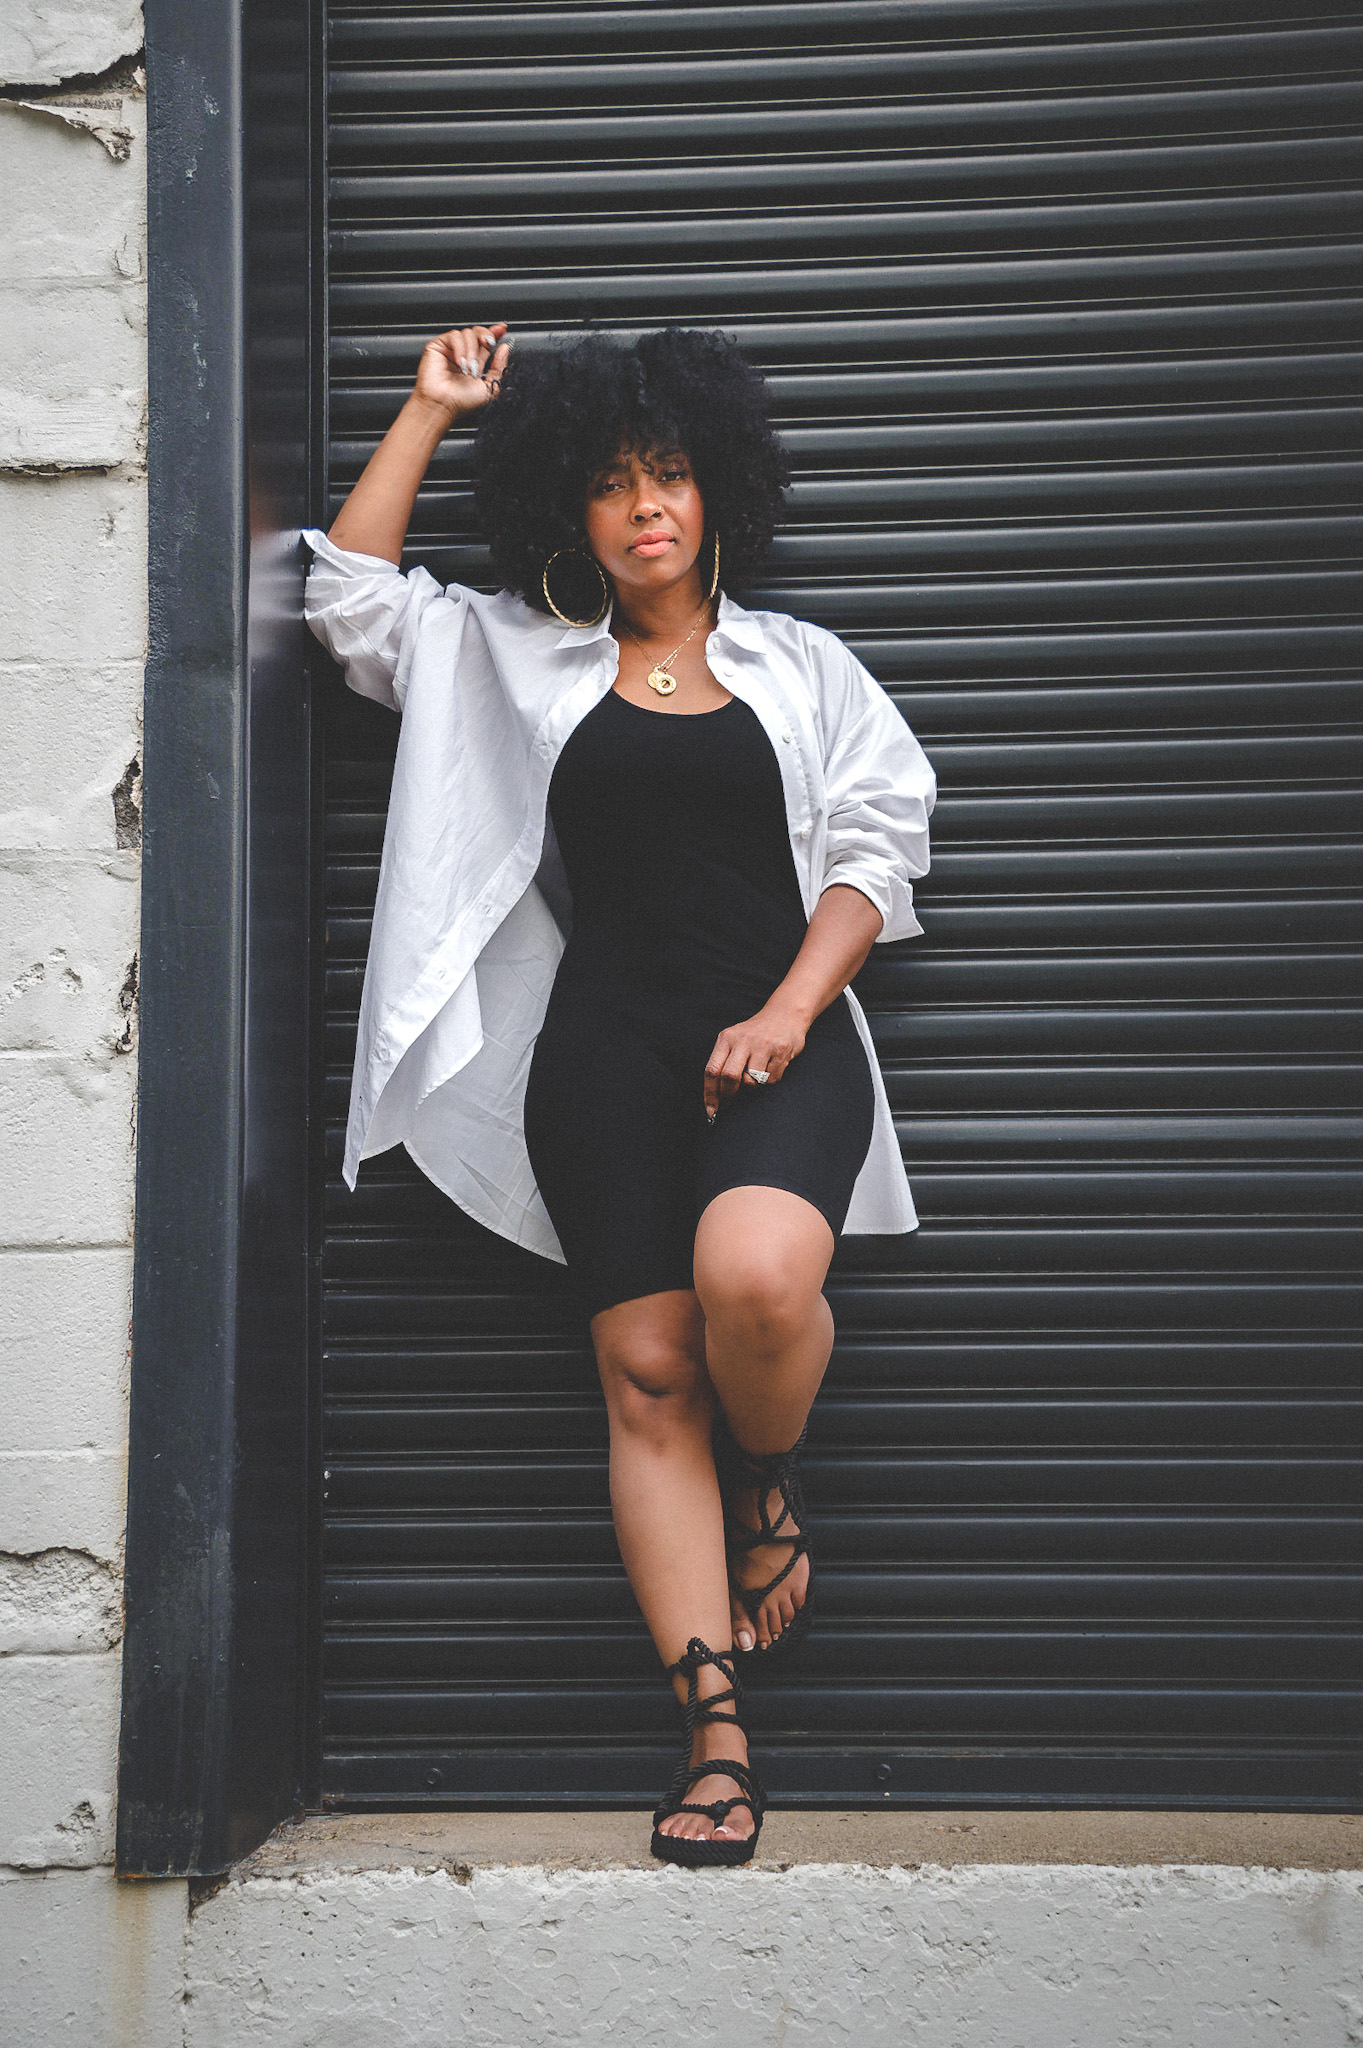 SWEENEE STYLE, BLACK BASICS, HOW TO WEAR BIKER SHORTS, HOW TO WEAR NATURAL HAIR, HOW TO WEAR A WHITE BUTTON DOWN TOP, NATURAL CURLS, INDIANAPOLIS FASHION BLOG, INDIANA FASHION BLOGGER, BLACK GIRLS WHO BLOG, BLACK GIRL FASHION BLOGGER
